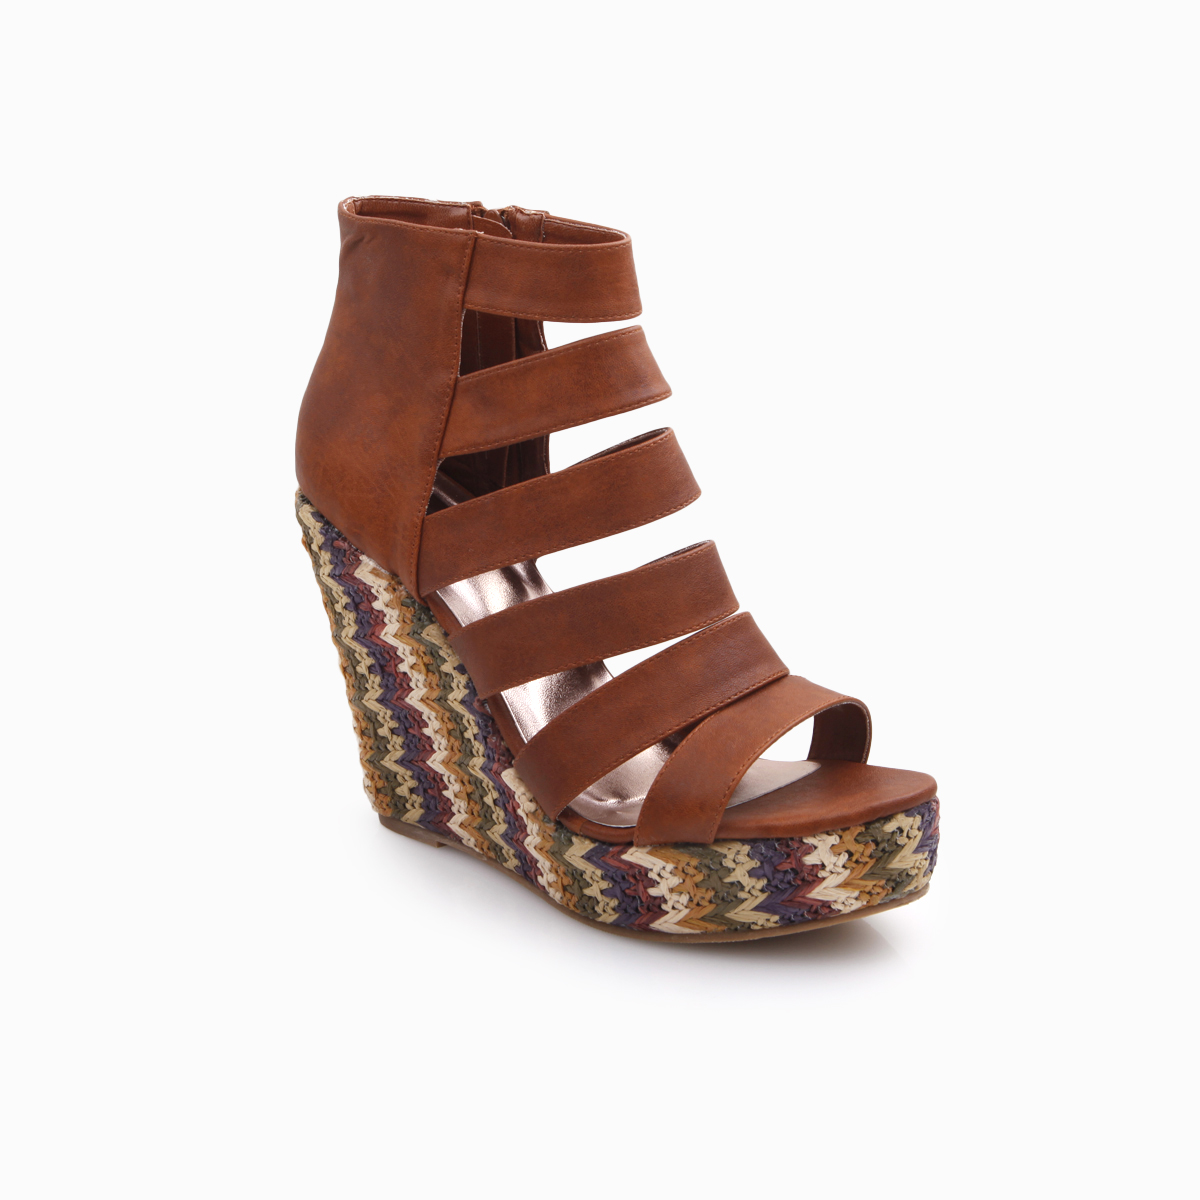 Weaved Wedges by Glaze